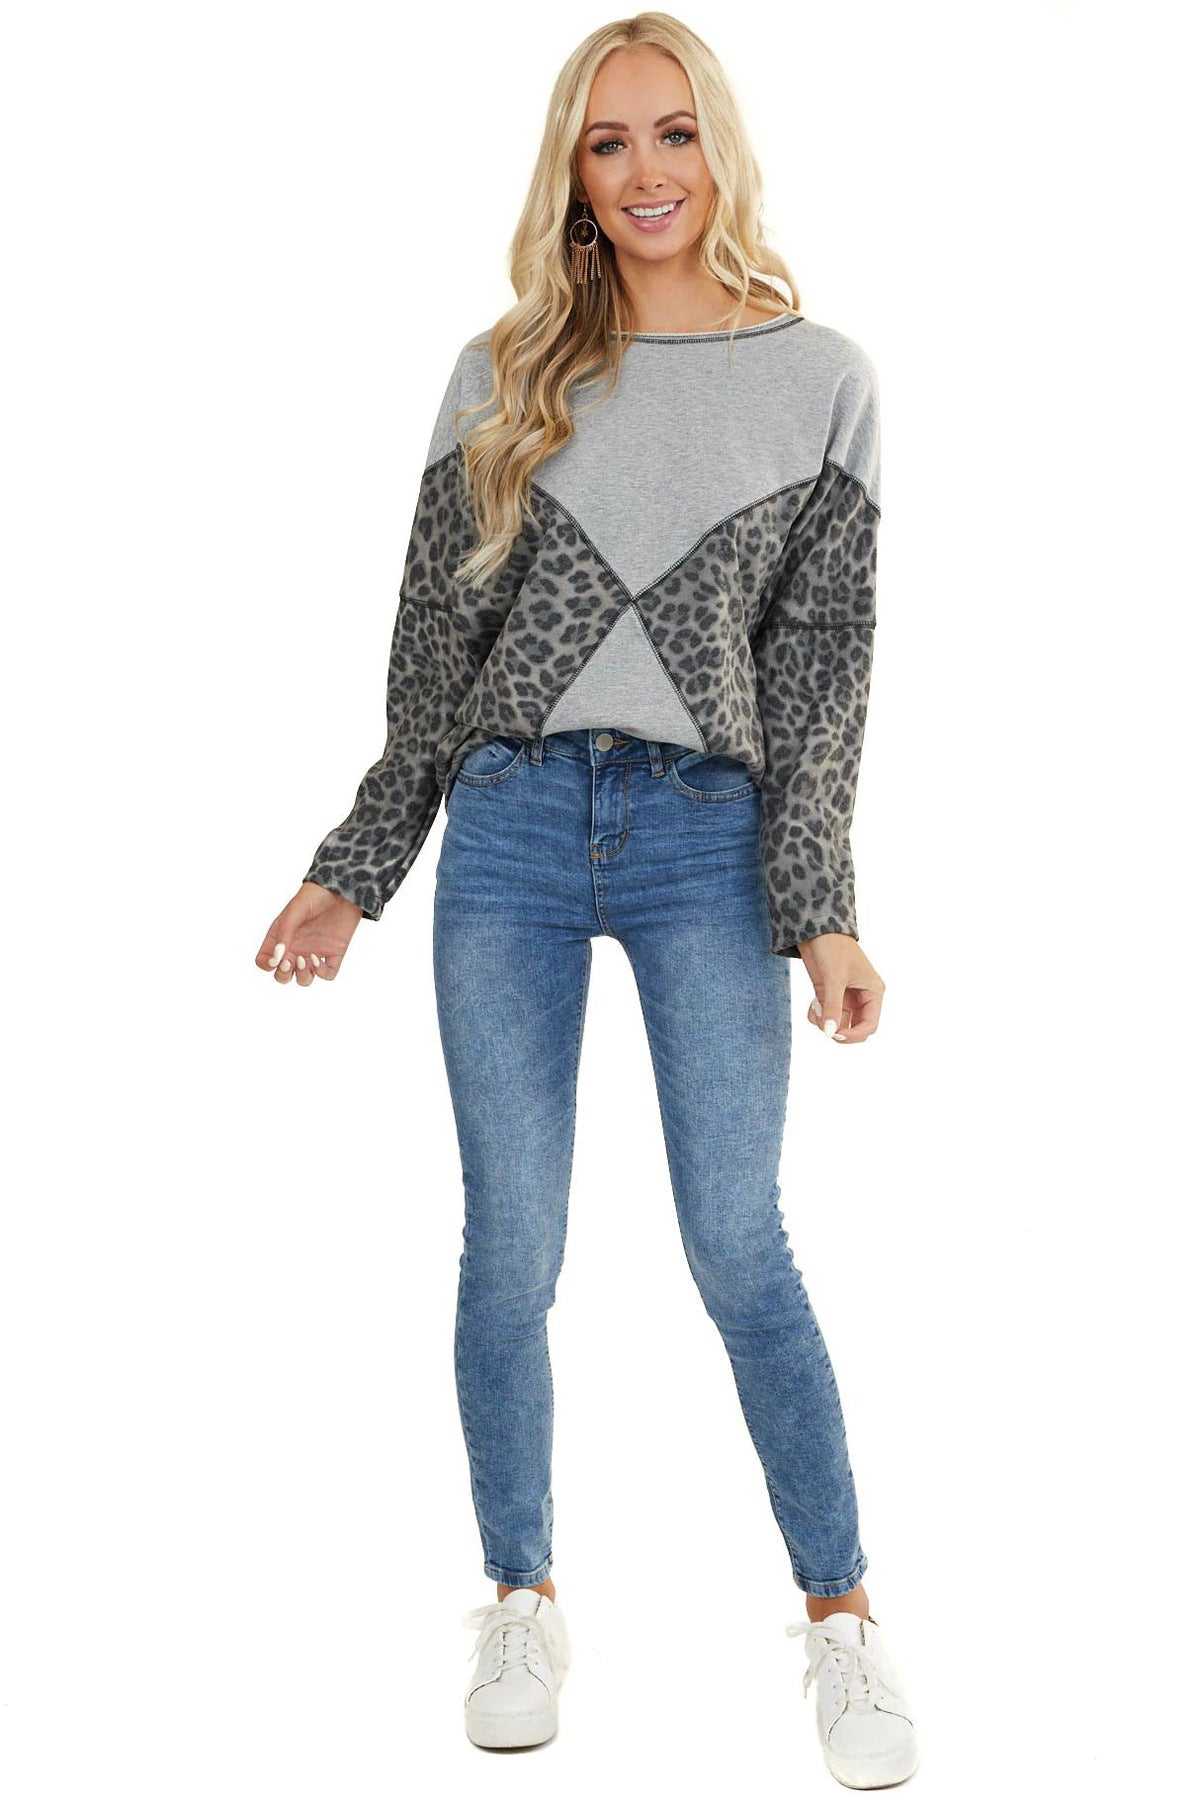 Women Leopard Print Fall Sweater Hoodies-Shirts & Tops-Free Shipping at meselling99